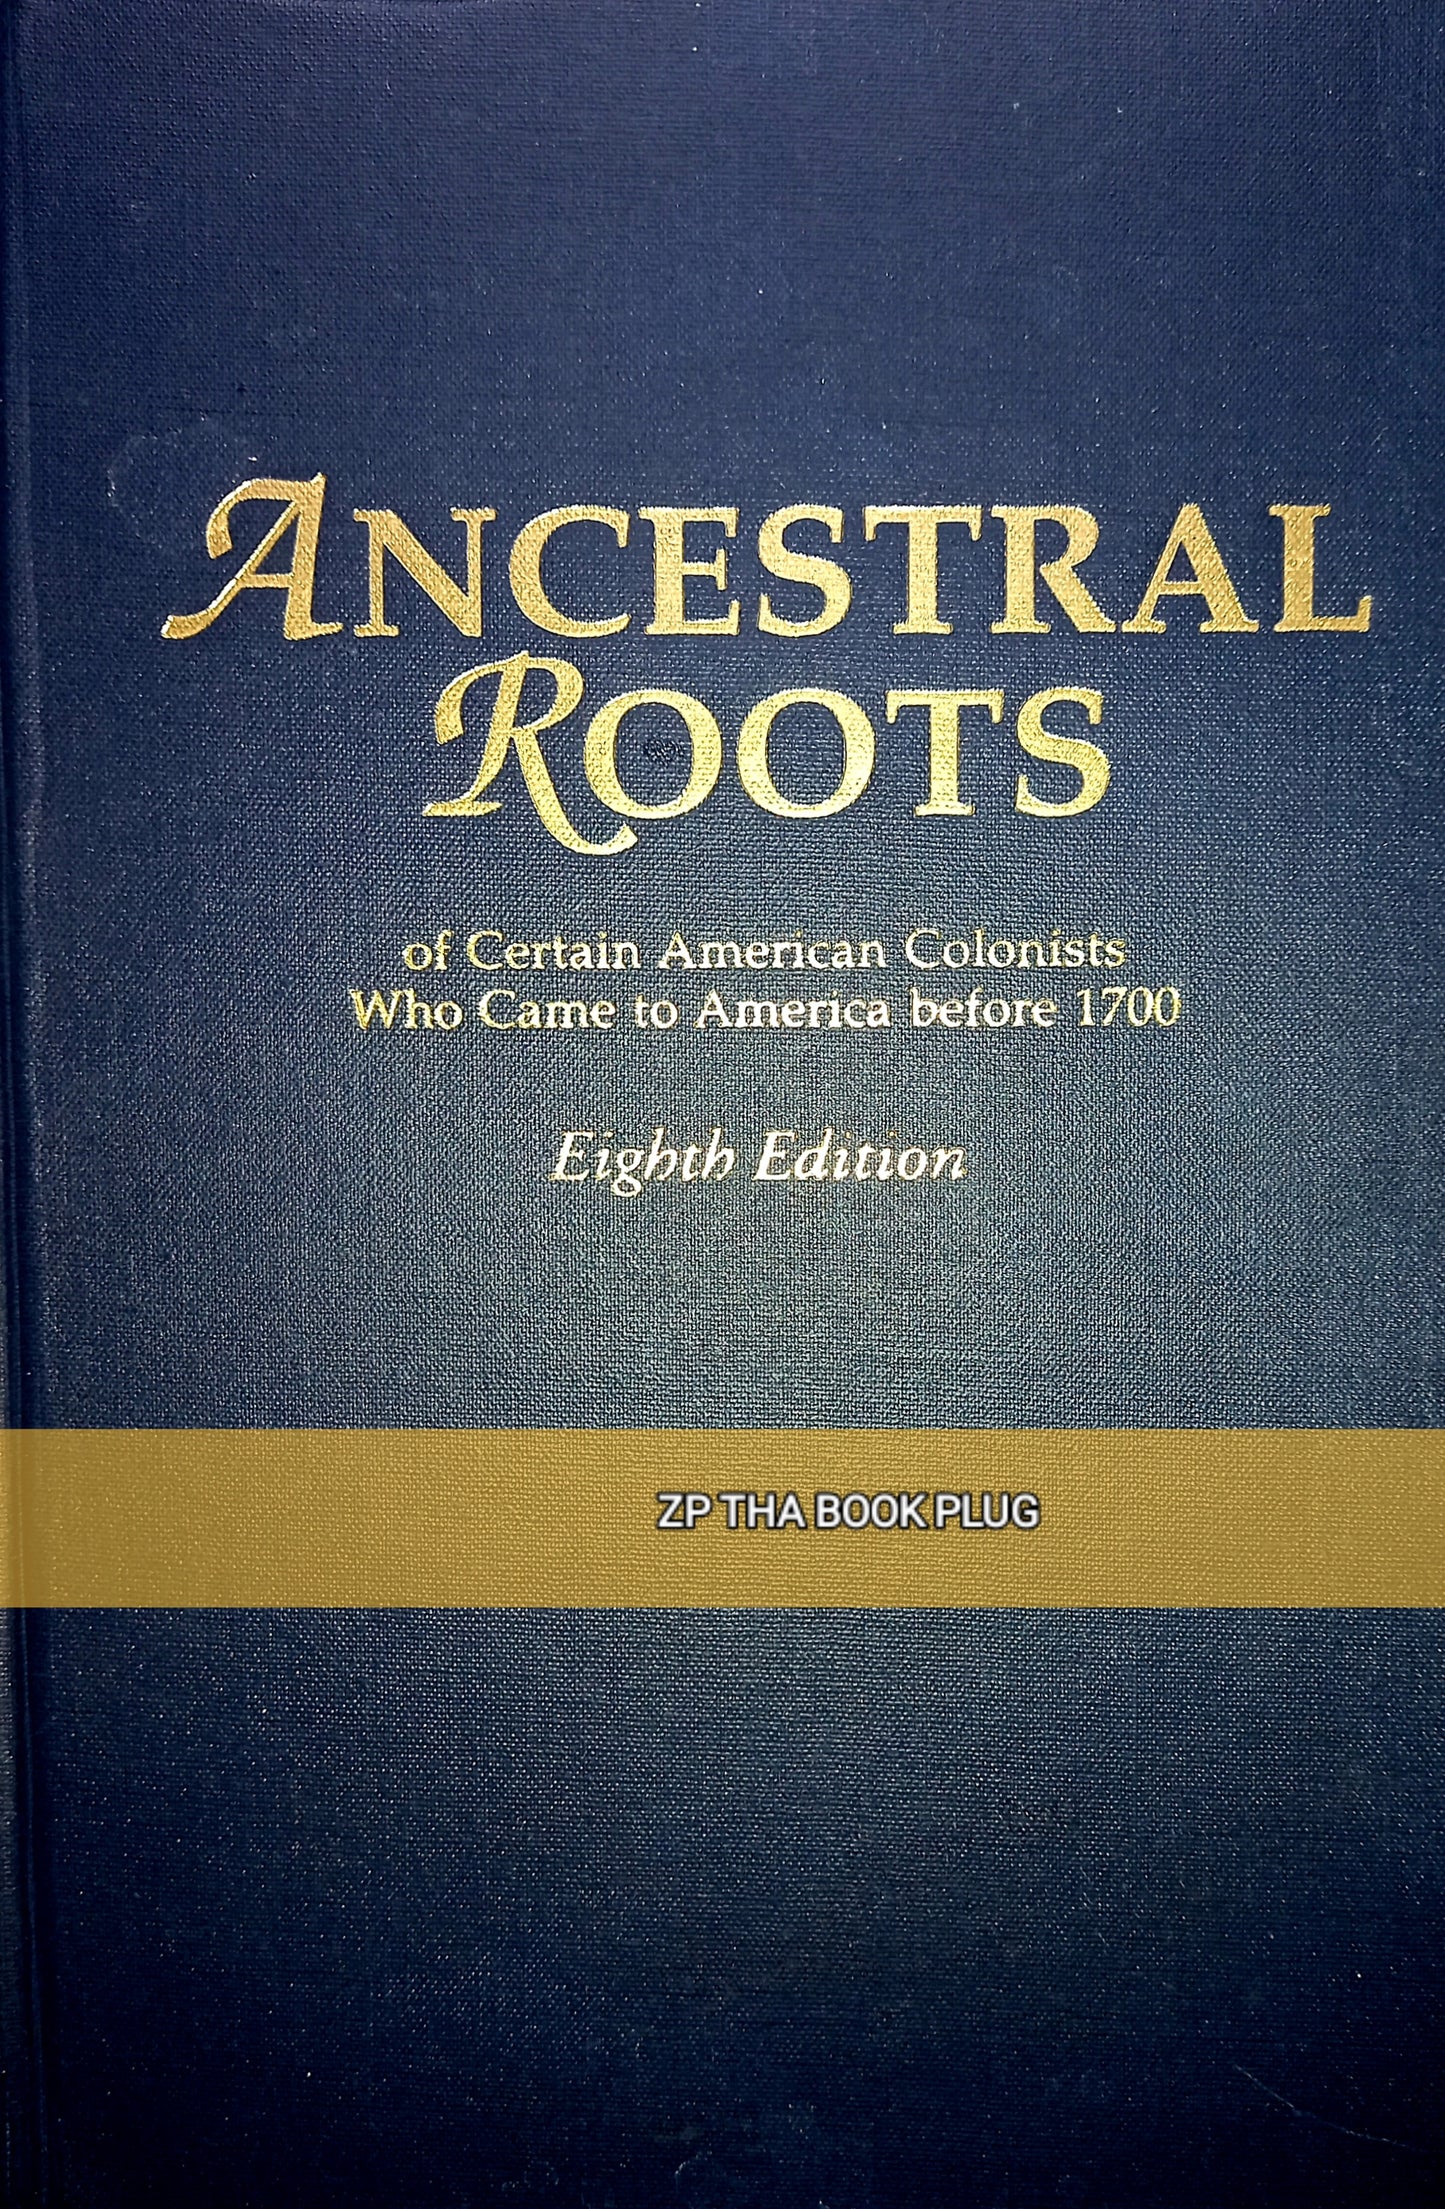 Ancestral Roots of Certain American Colonists Who Came to America before 1700 (Eighth Edition)